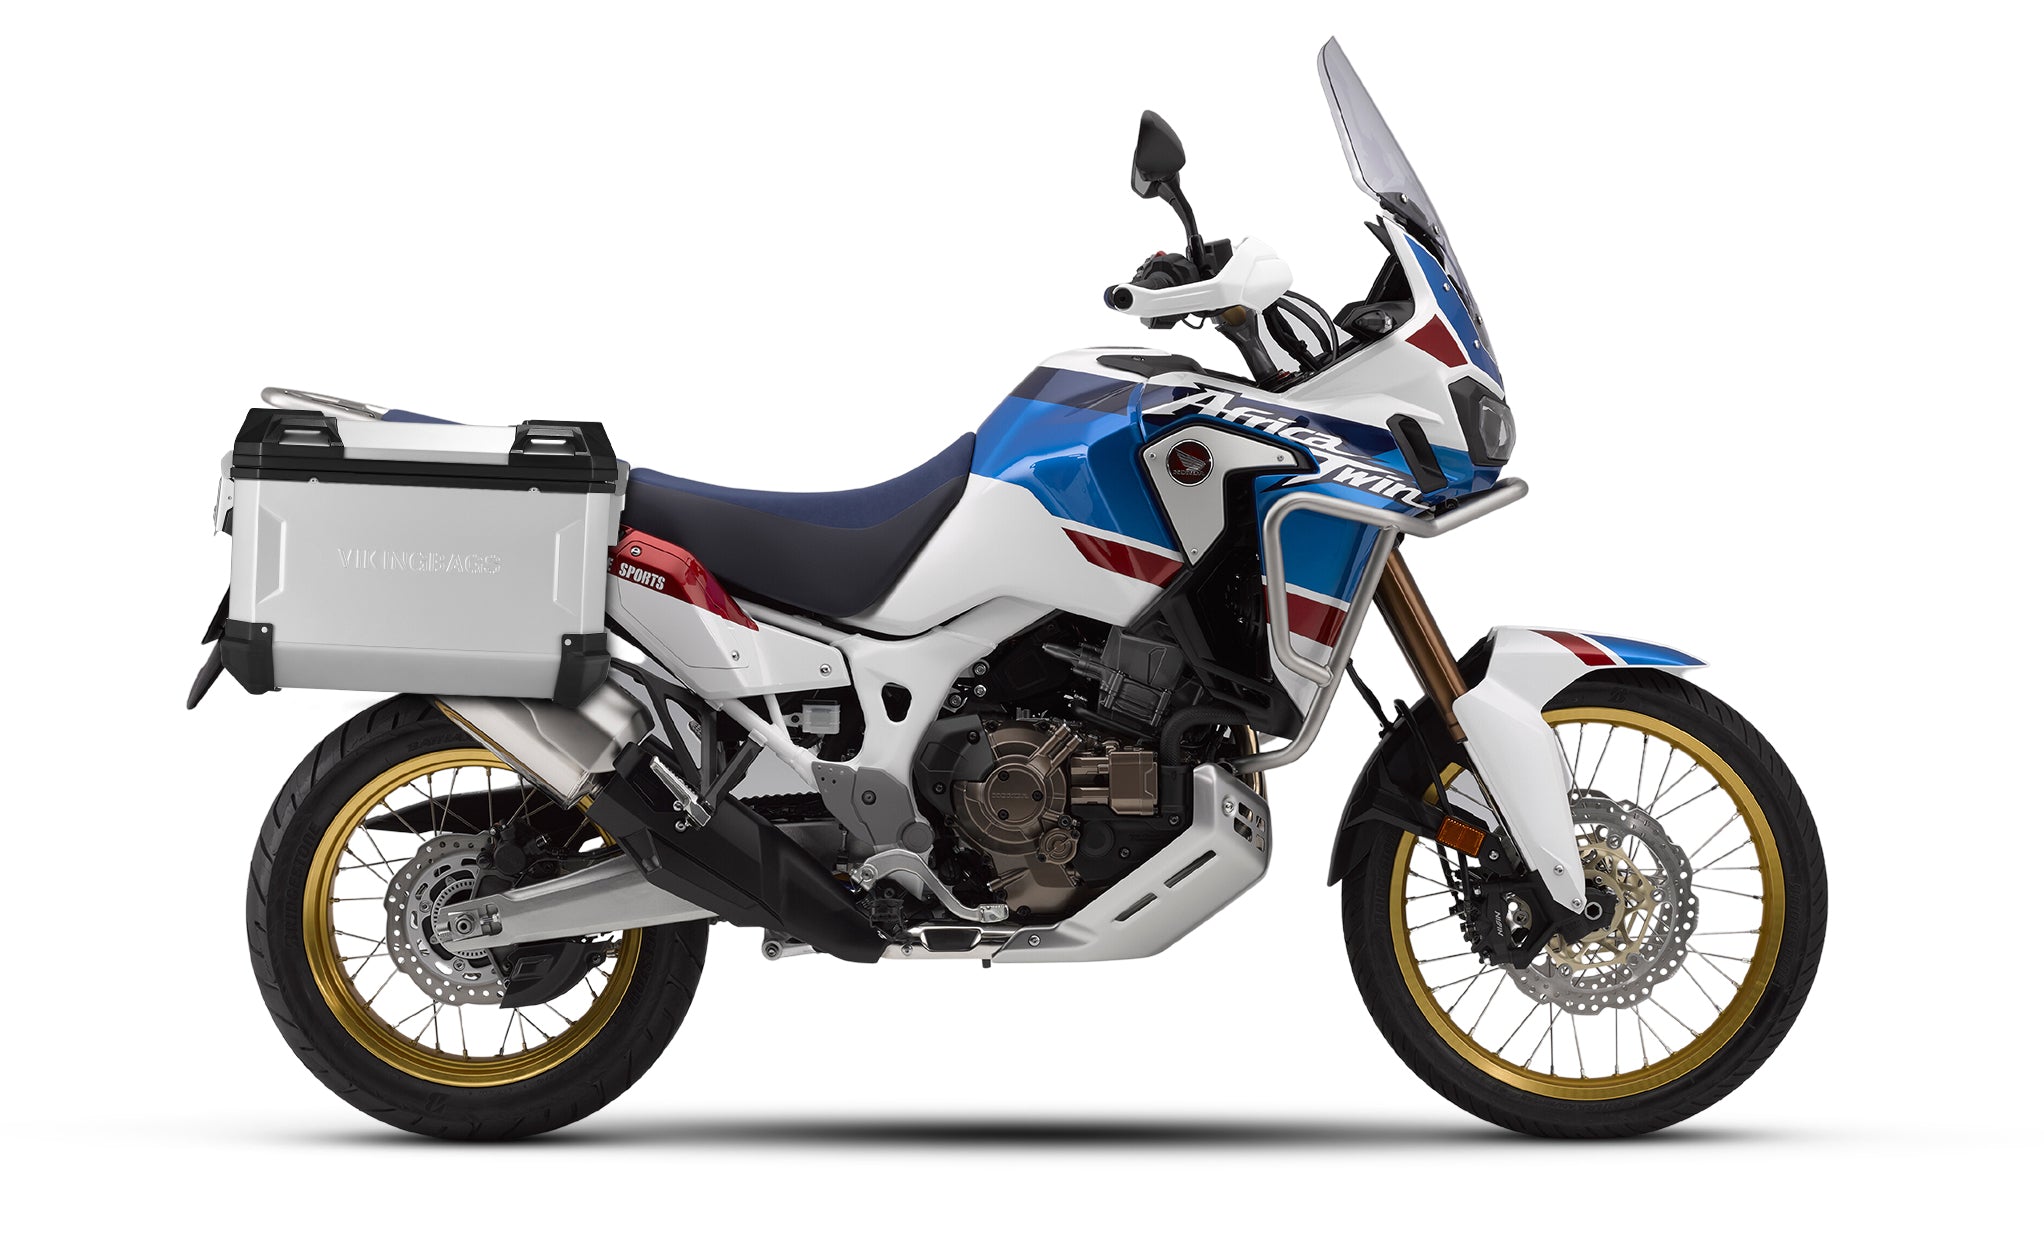 Viking Apex XL Honda CRF1100L Africa Twin ADV Sports ES Aluminum Side Cases Silver Bag on Bike View @expand